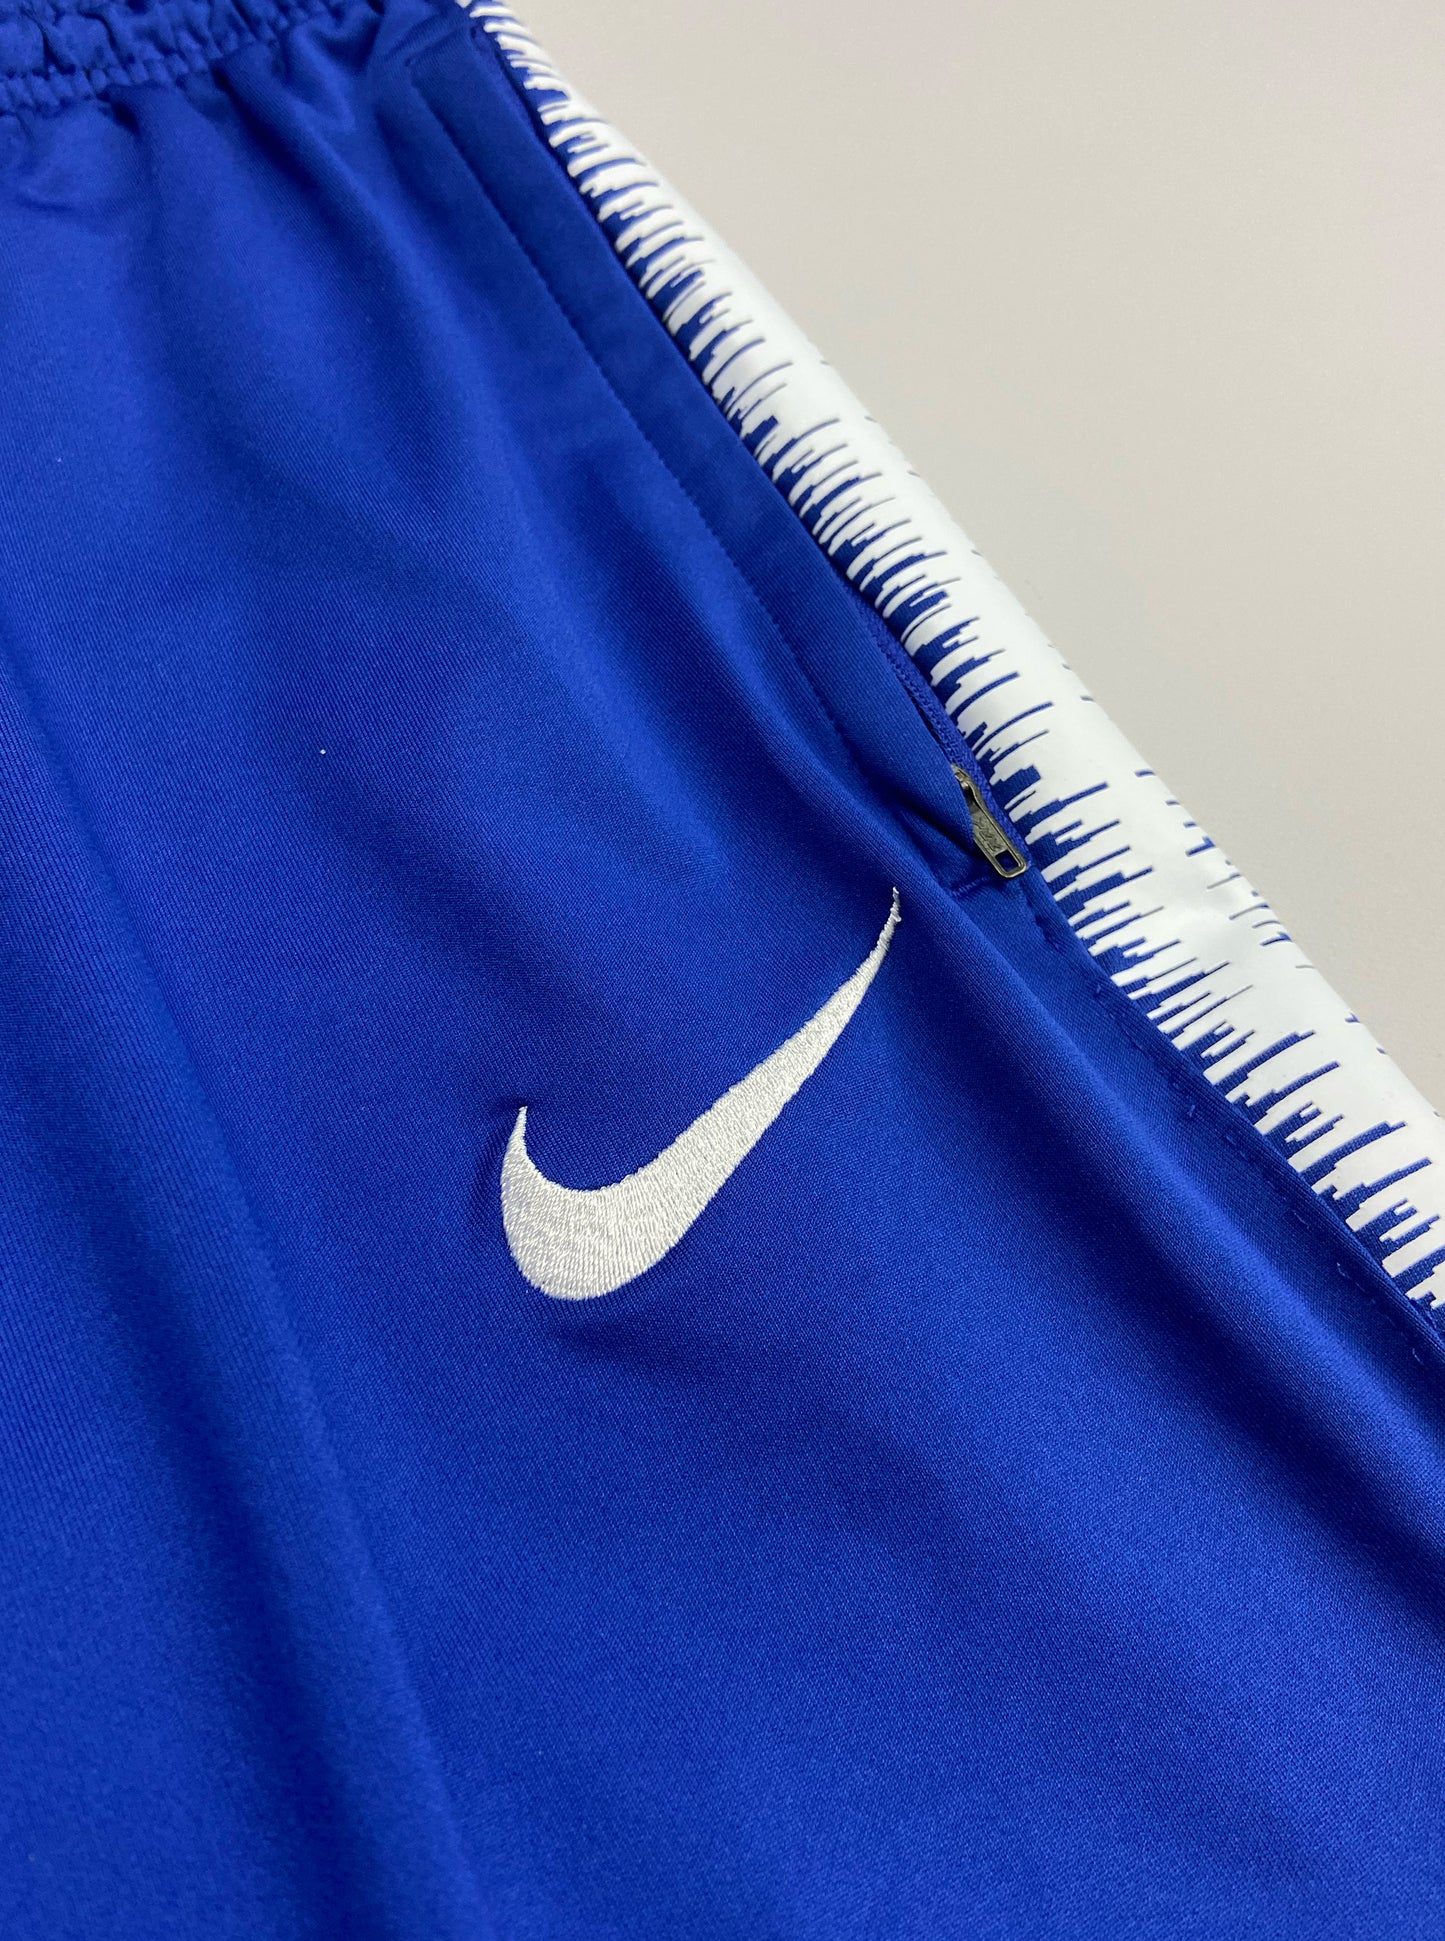 2019/20 CHELSEA TRACKSUIT BOTTOMS (S) NIKE